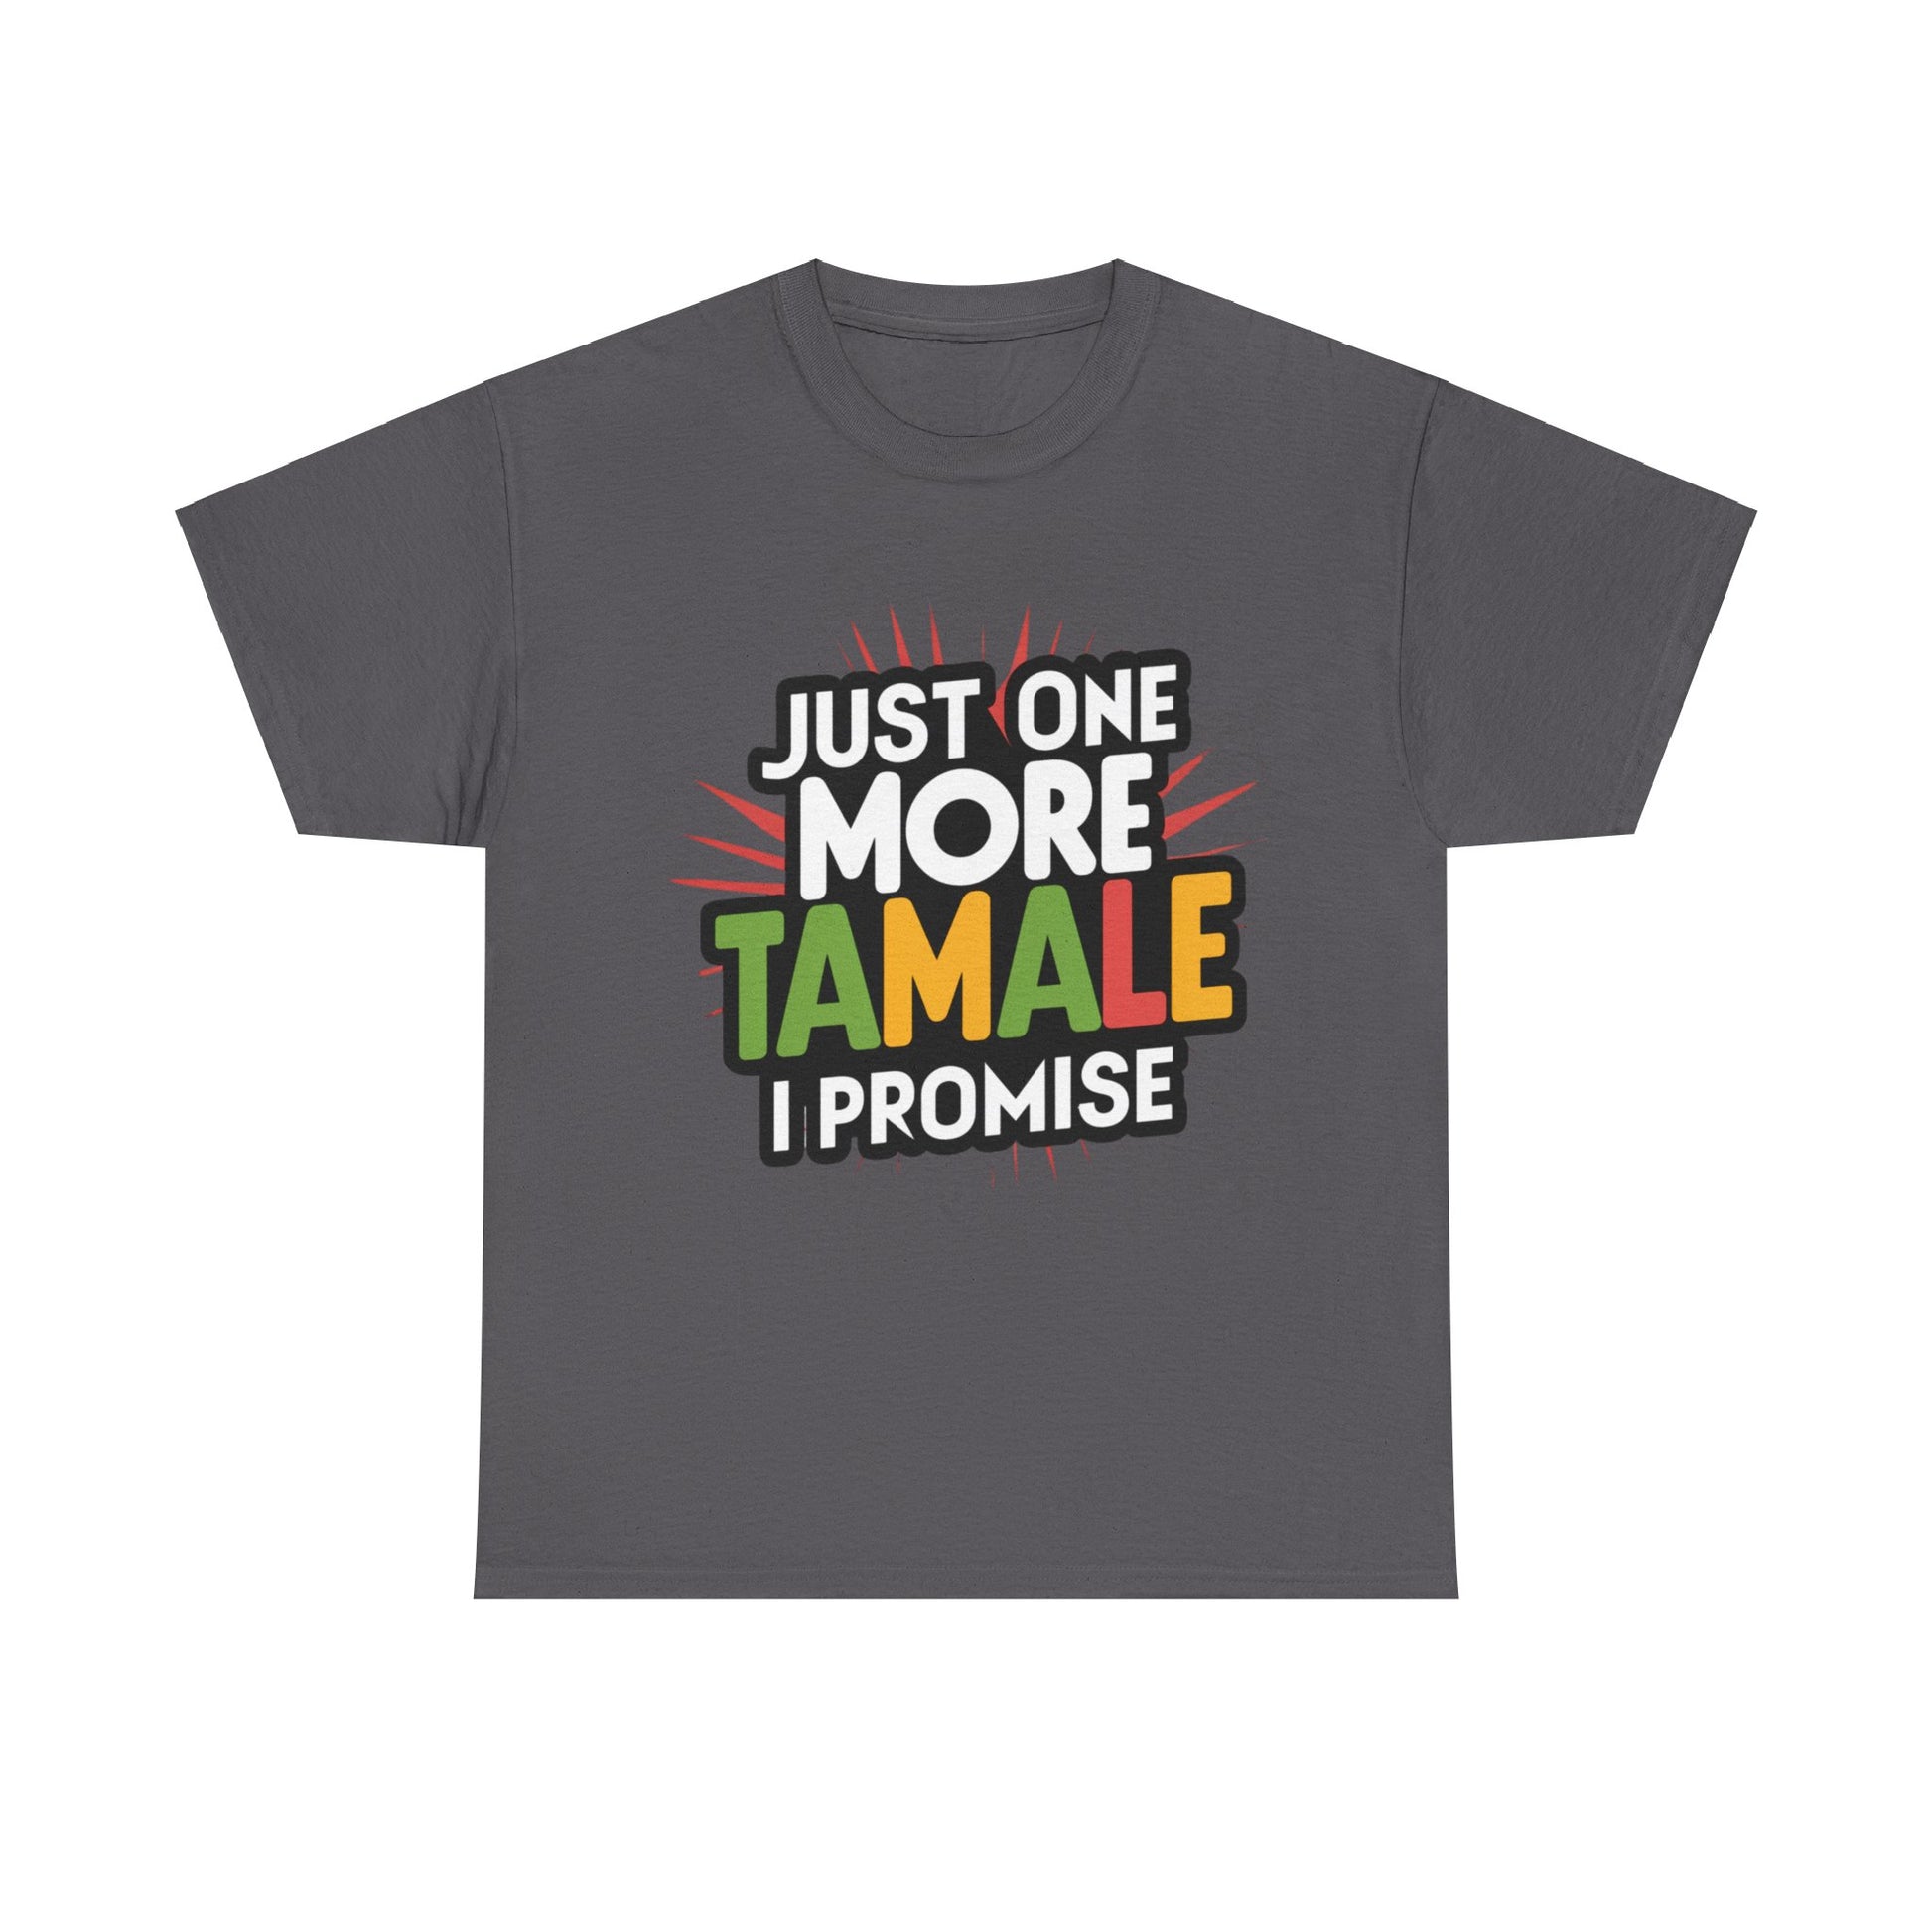 Just One More Tamale I Promise Mexican Food Graphic Unisex Heavy Cotton Tee Cotton Funny Humorous Graphic Soft Premium Unisex Men Women Charcoal T-shirt Birthday Gift-2